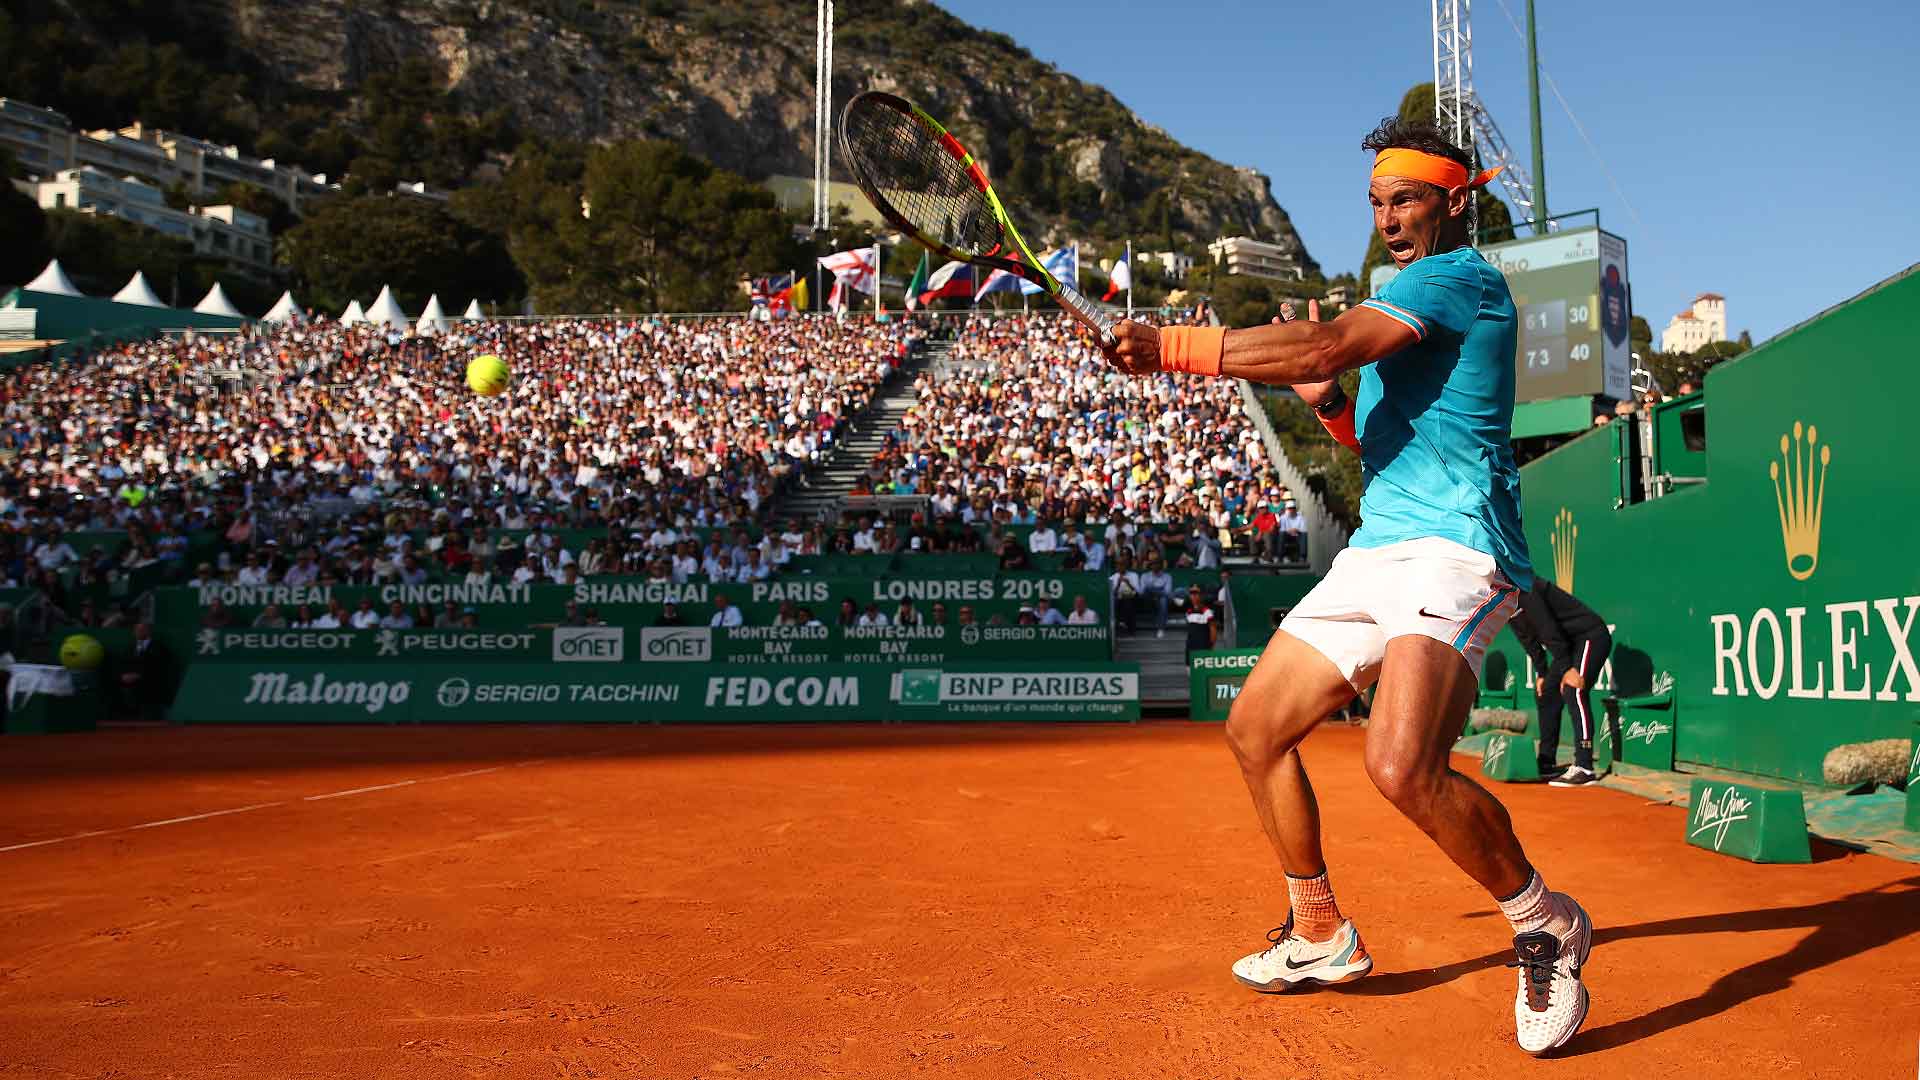 Monte Carlo Clay Court Tennis Tournament By Claud Ambaud,